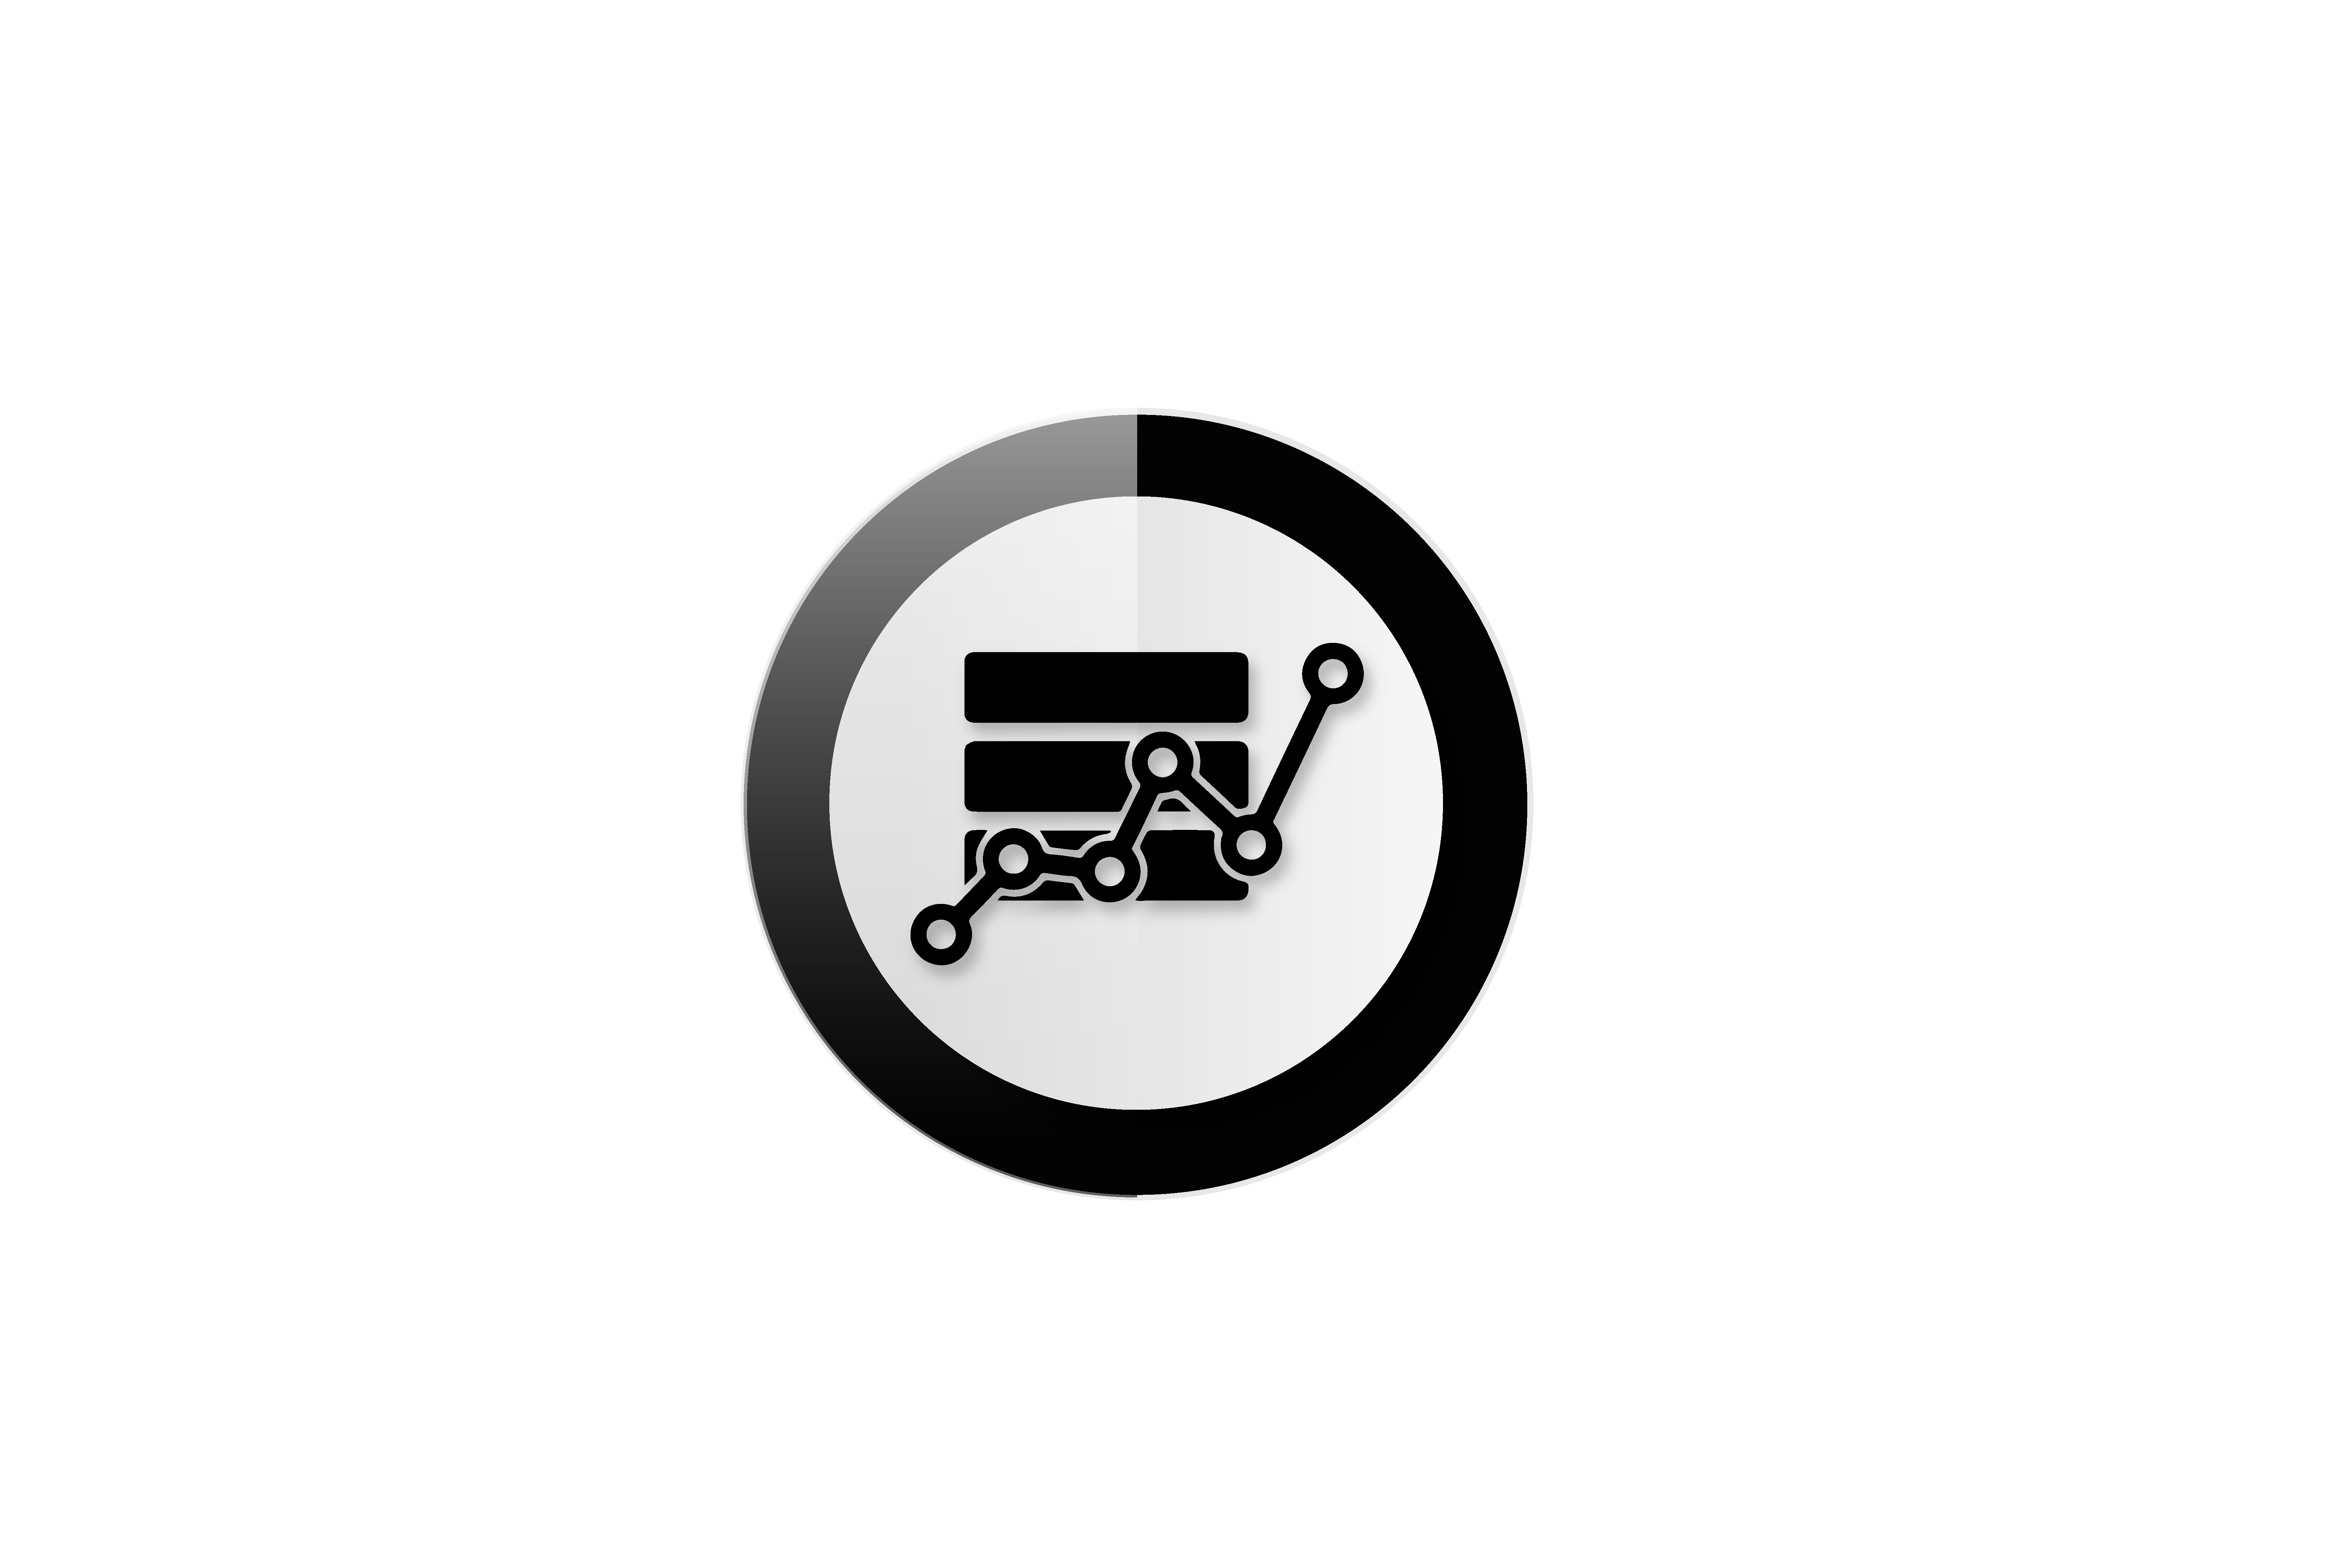 A black and white icon of a computer server.